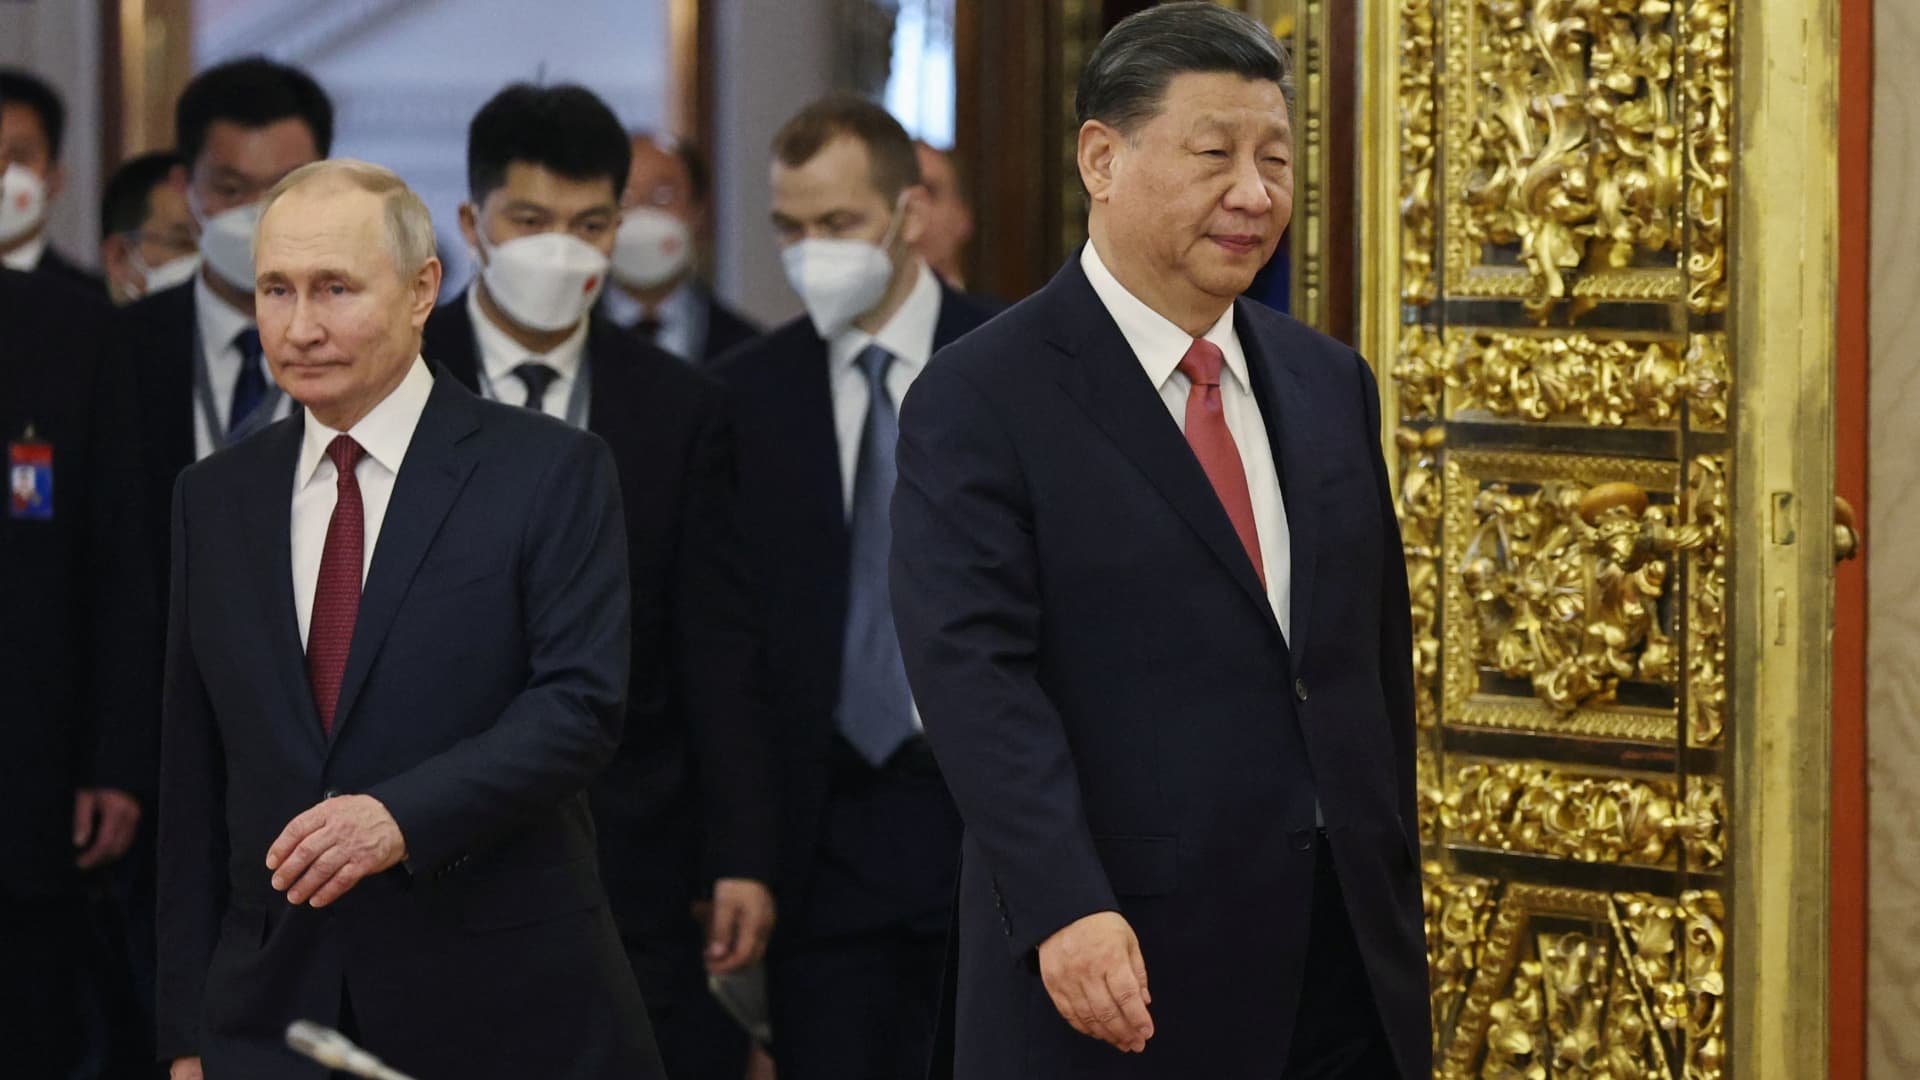 Russian President Vladimir Putin and Chinese President Xi Jinping attend a welcome ceremony before Russia-China talks in Moscow, Russia, on March 21, 2023. Analysts are generally skeptical about China's positioning of itself as a mediator and its ability to help bring an end to the war, questioning how much sway Beijing has over Moscow.